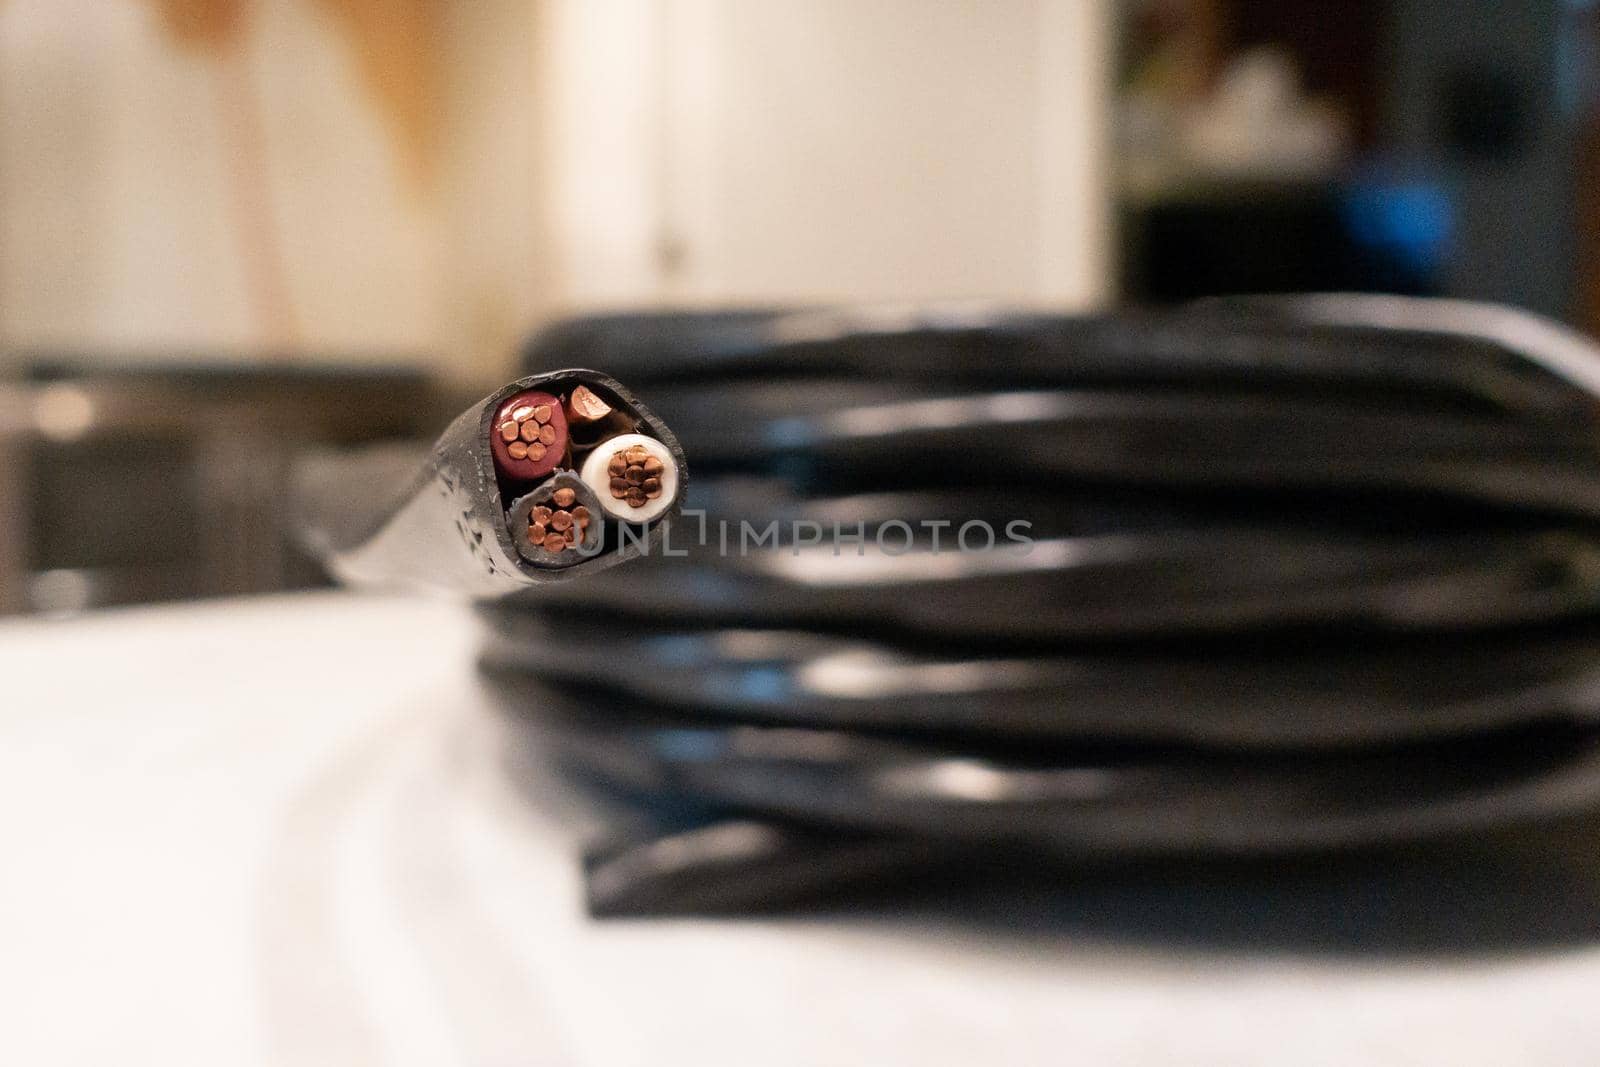 eight gauge copper wire cable 600 volts rating by digidreamgrafix